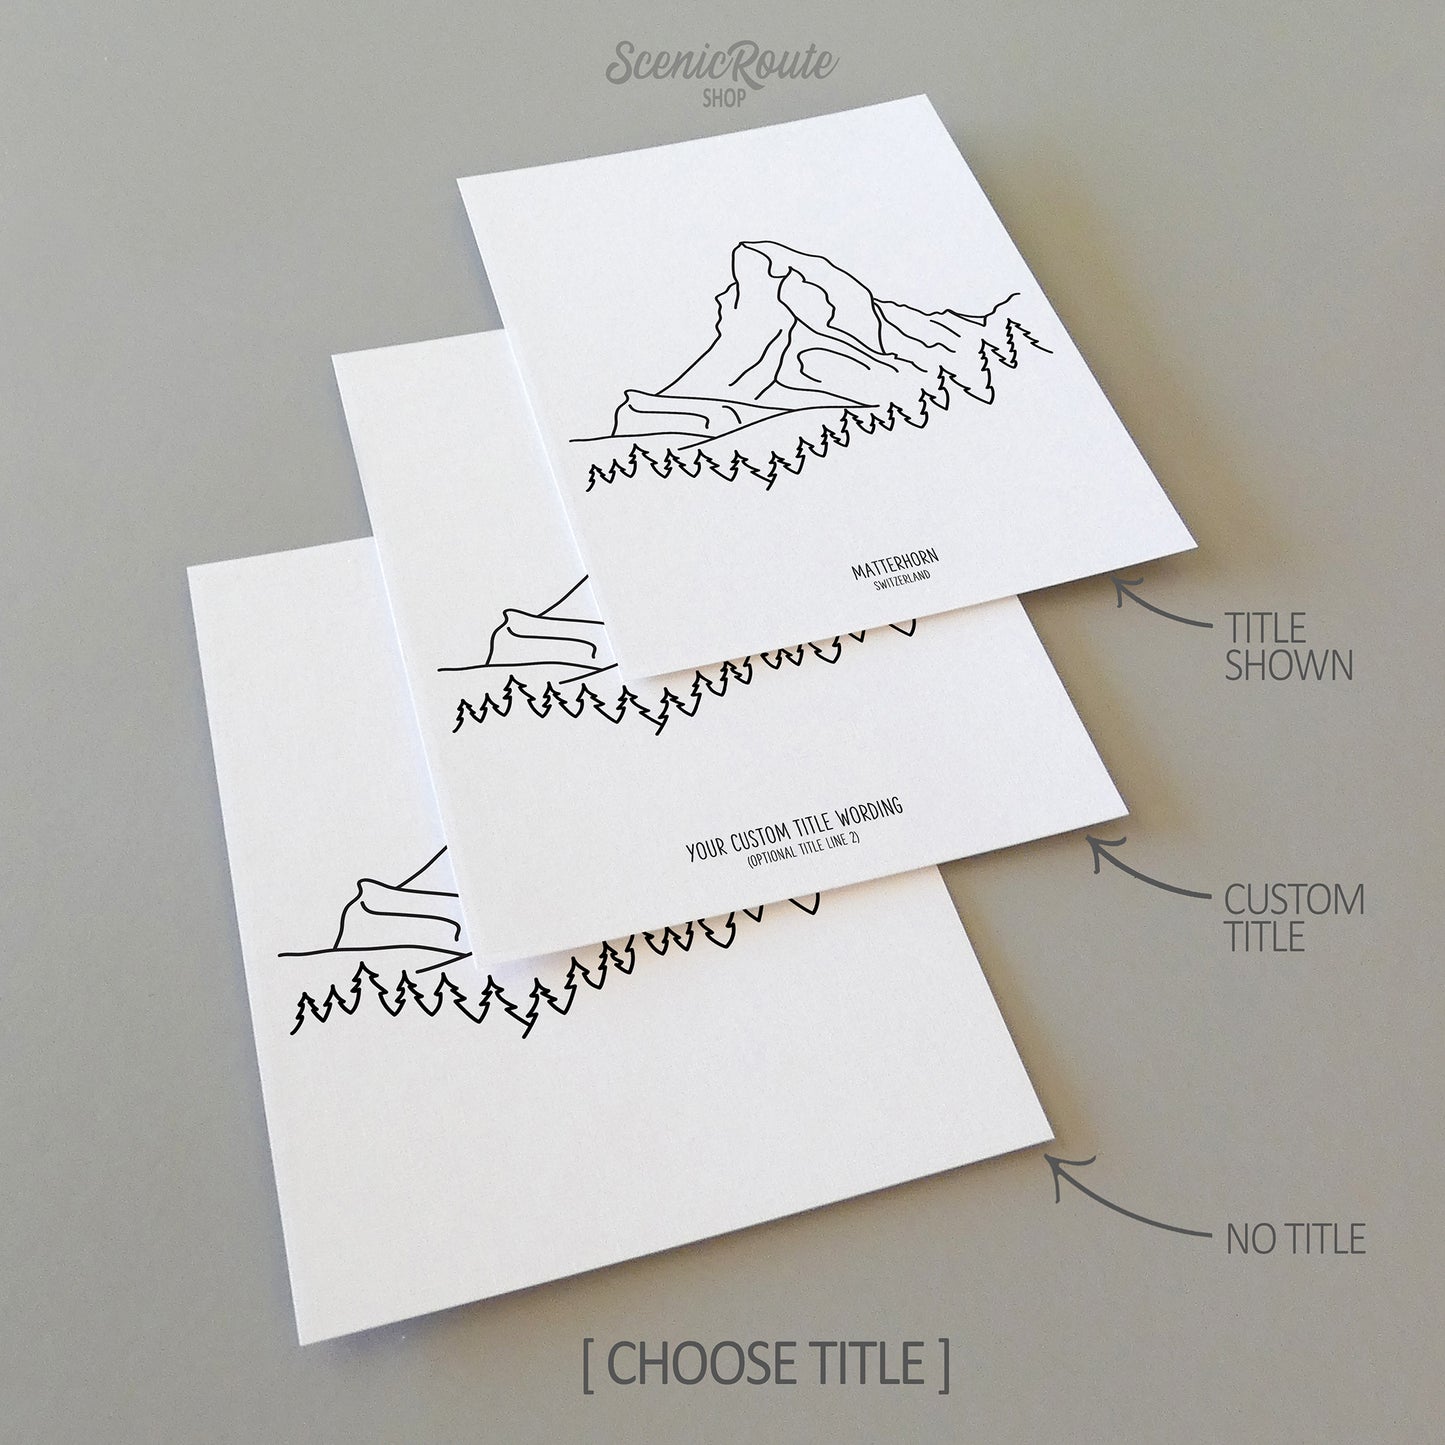 Three line art drawings of the Matterhorn Mountain in Switzerland on white linen paper with a gray background.  The pieces are shown with title options that can be chosen and personalized.